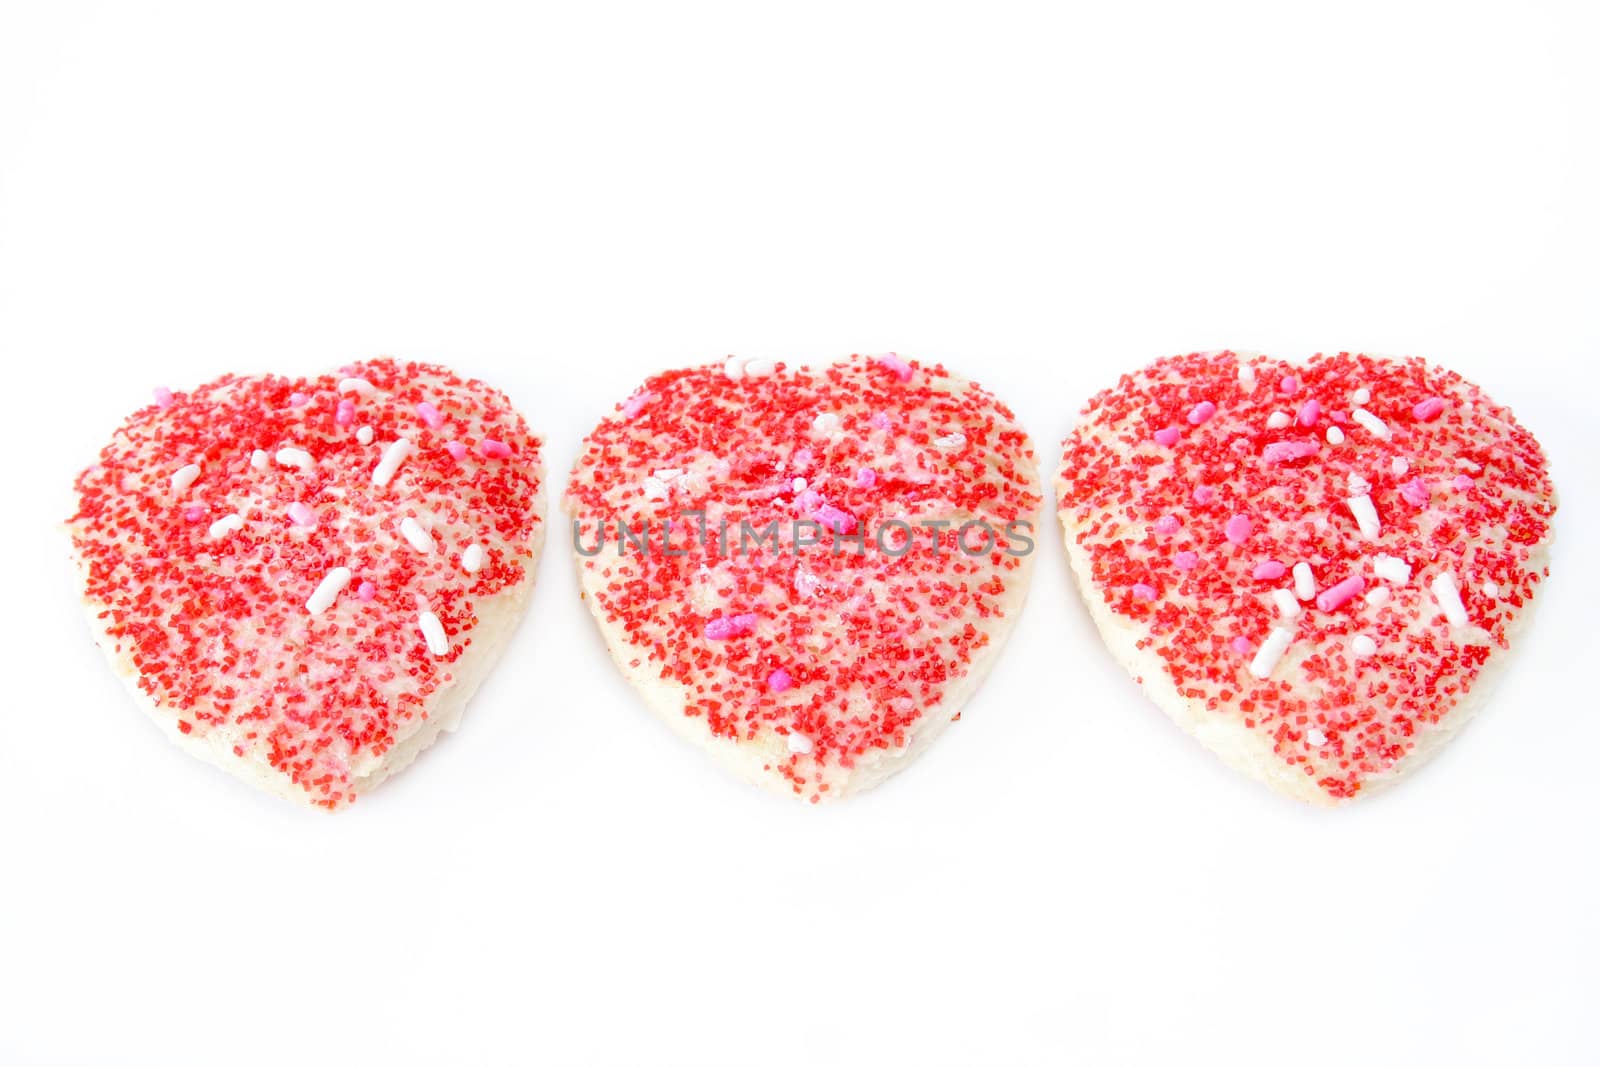 Three heart shaped cookies isolated on a white background.